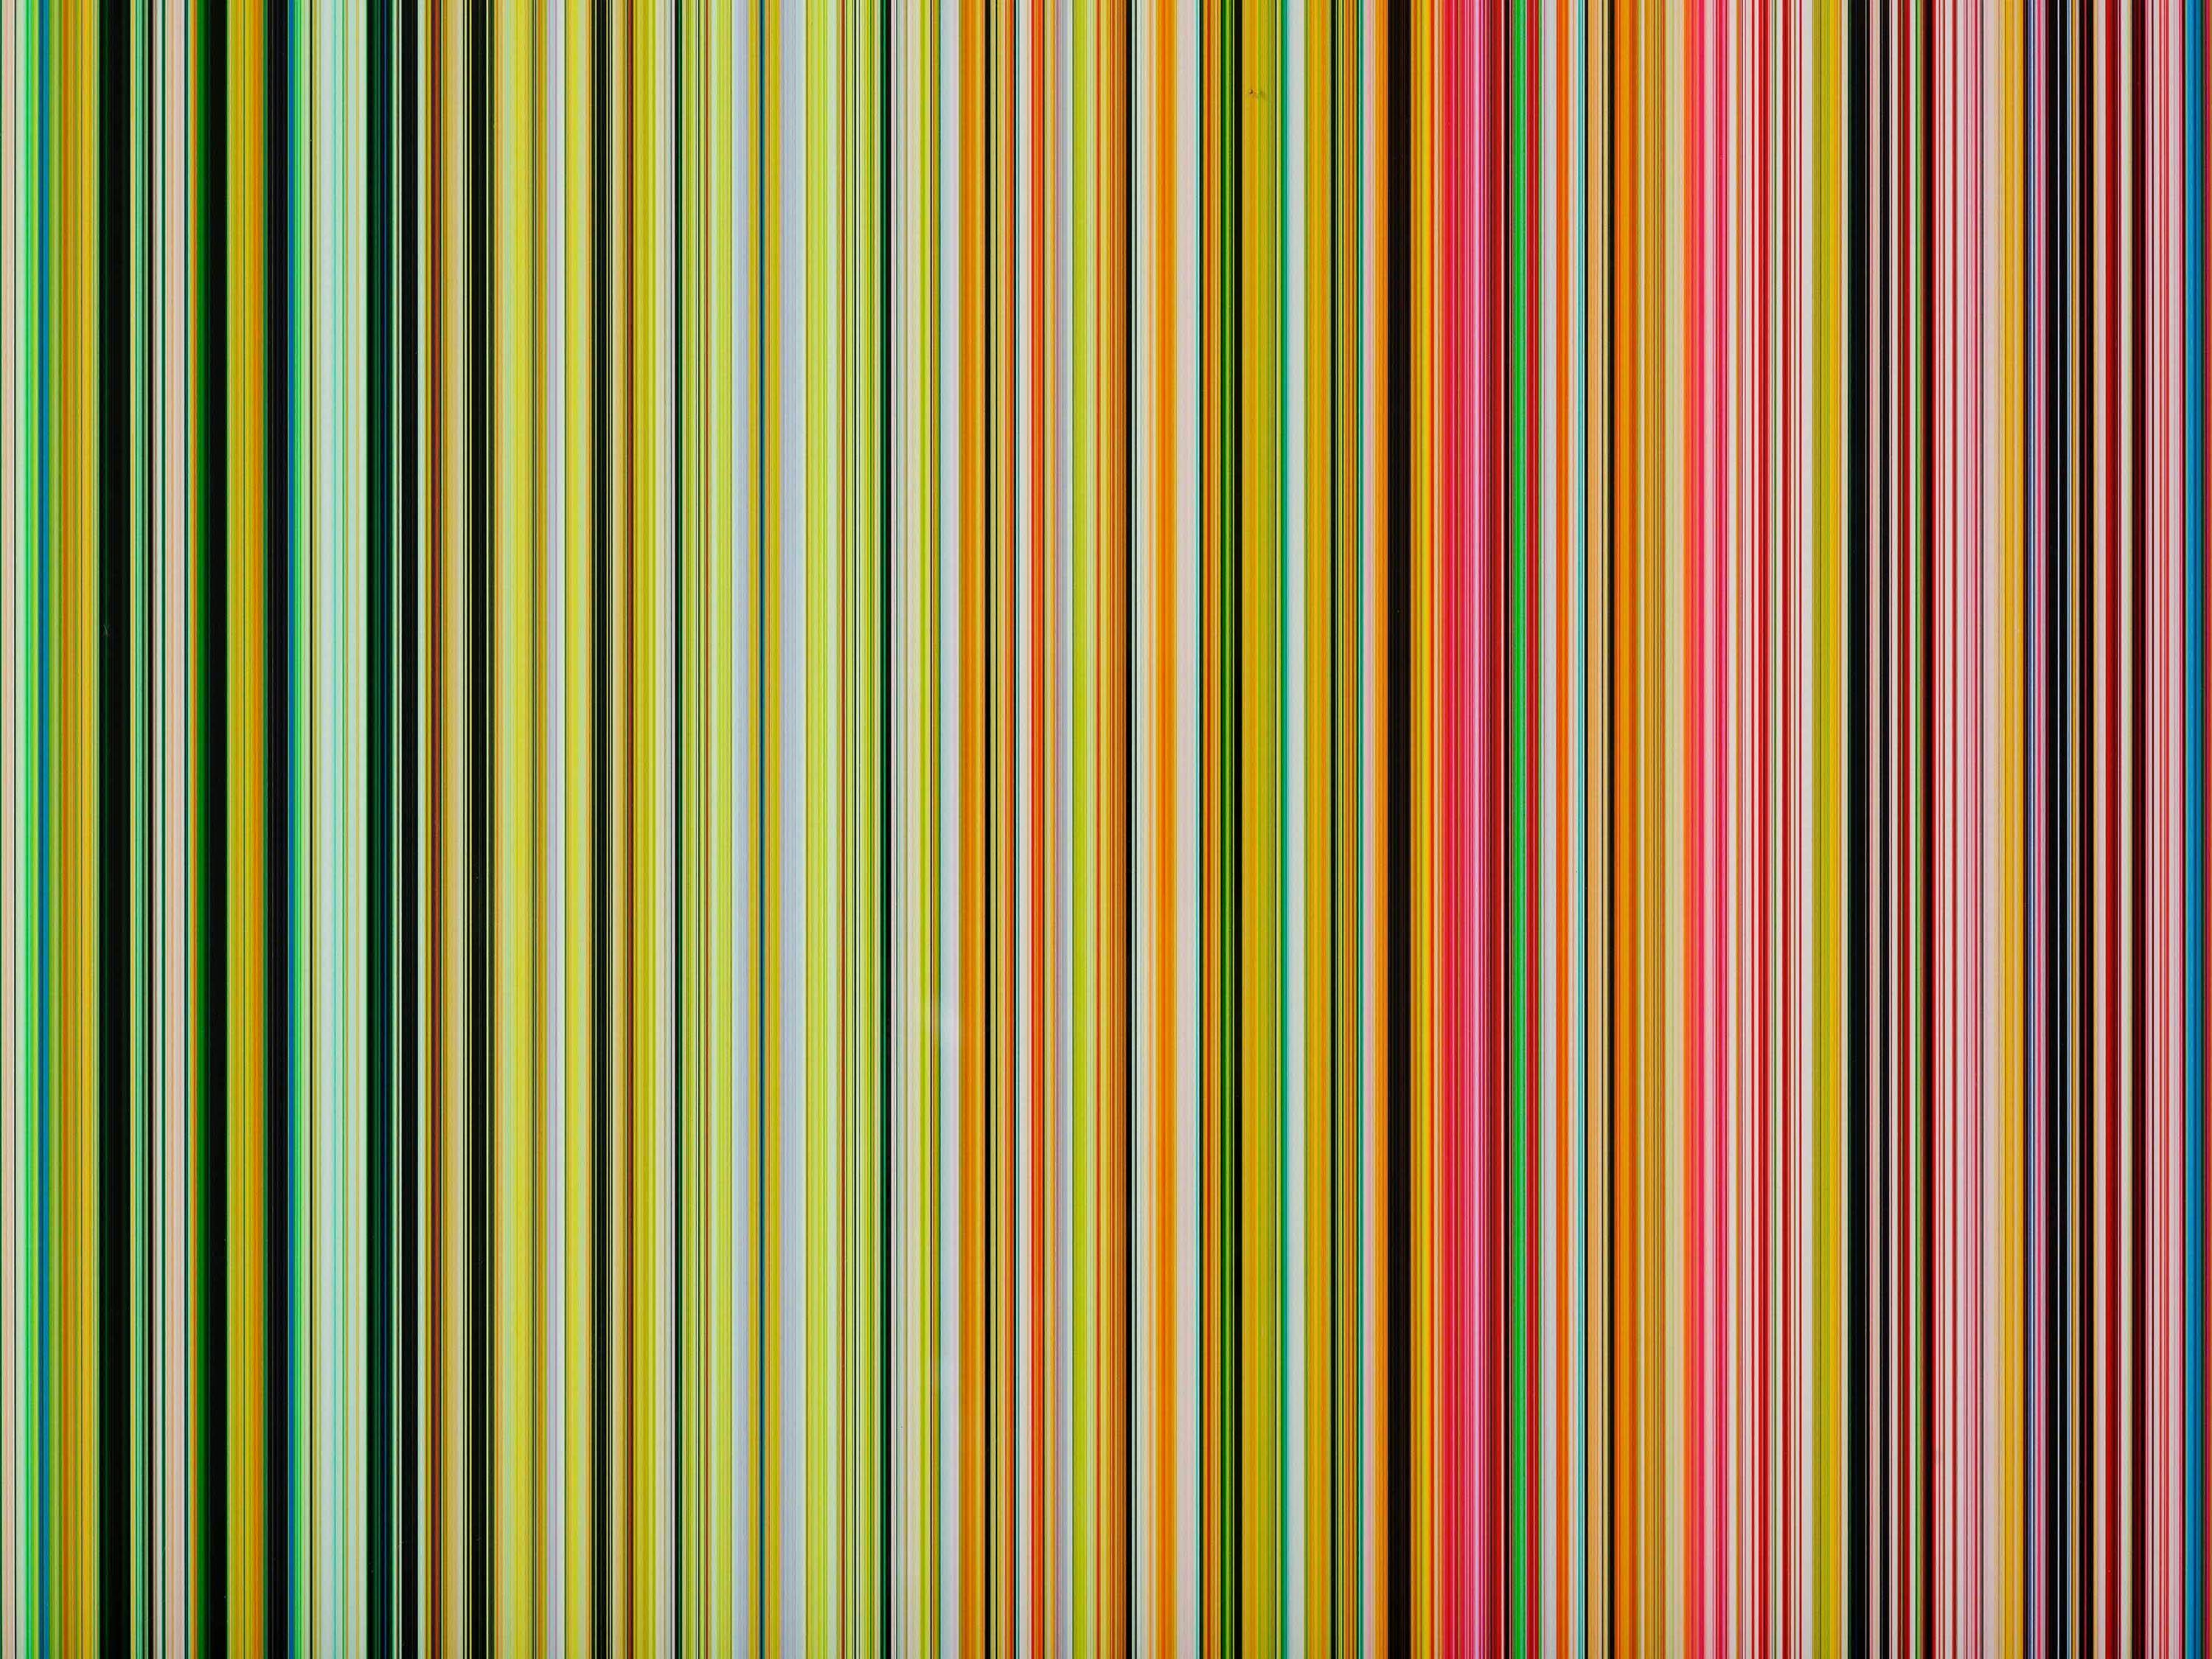 A detail from a sculpture by Gerhard Richter, titled STRIP-TOWER, dated 2023.